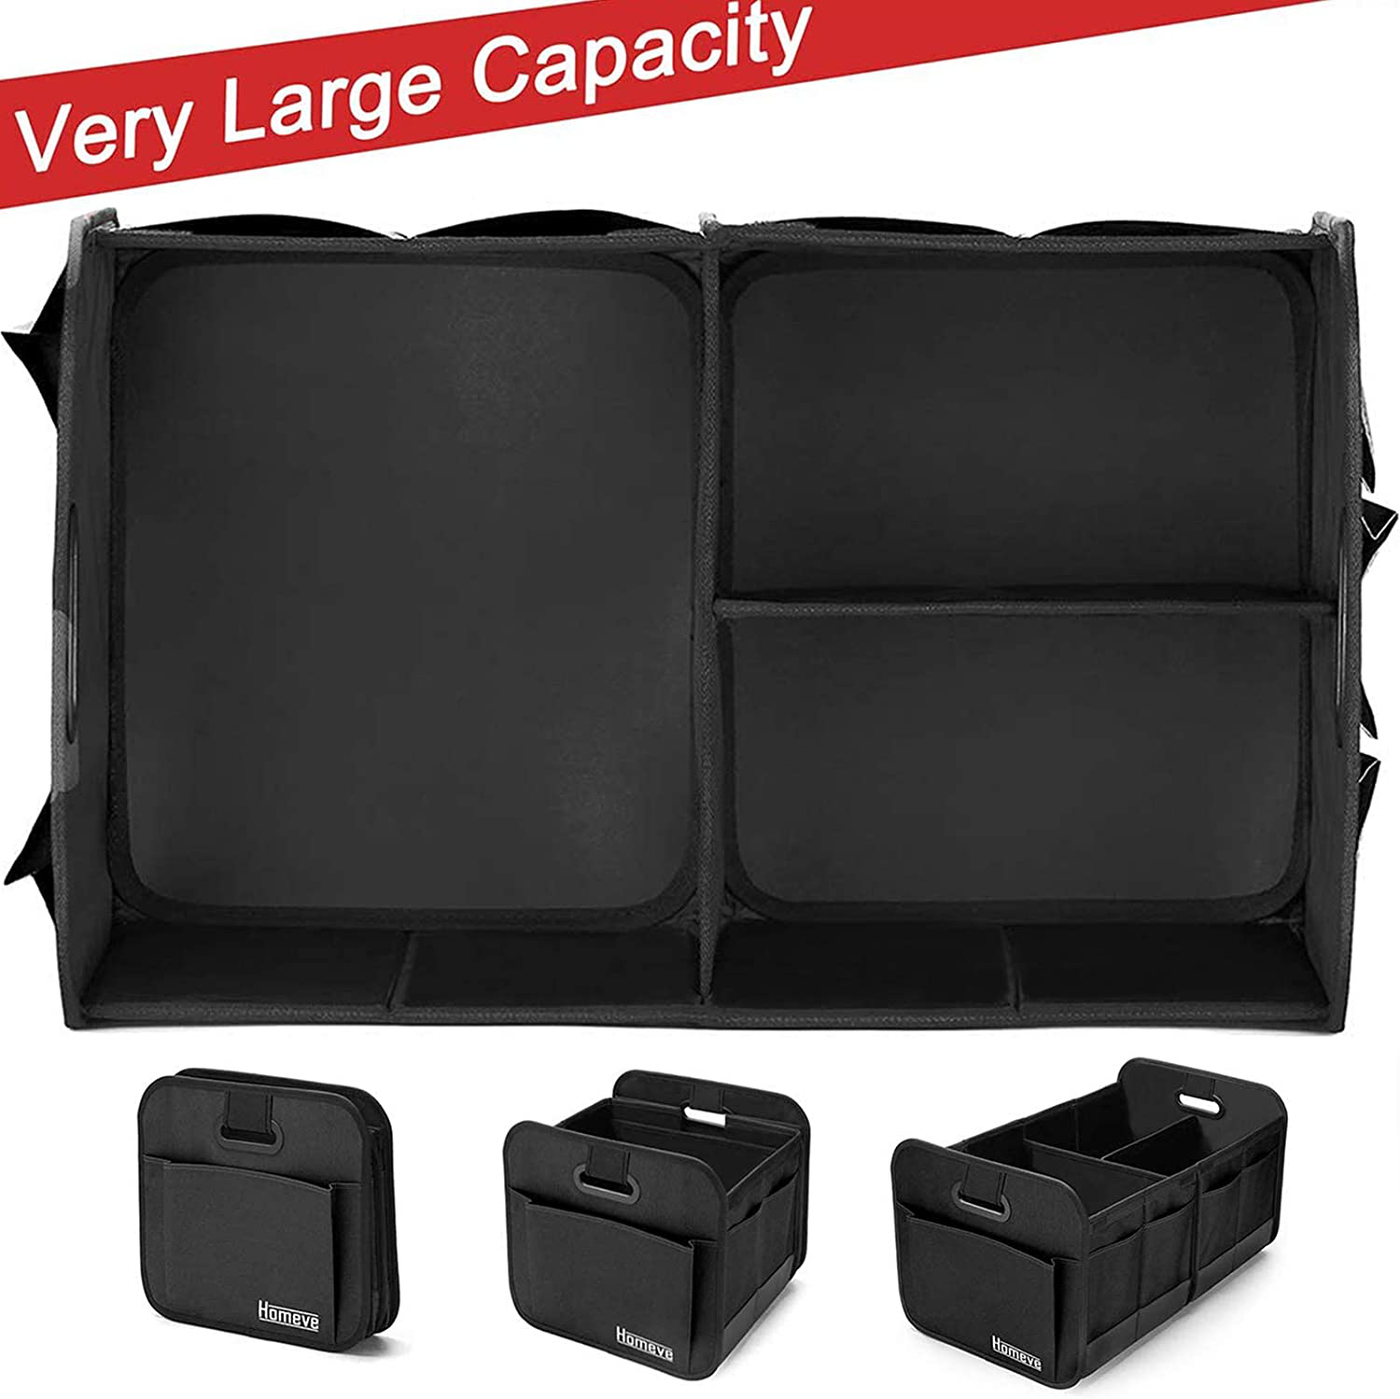 Foldable Trunk Storage Organizer, Reinforced Handles, Suitable for Any Car, SUV, Mini-Van Model Size, Black